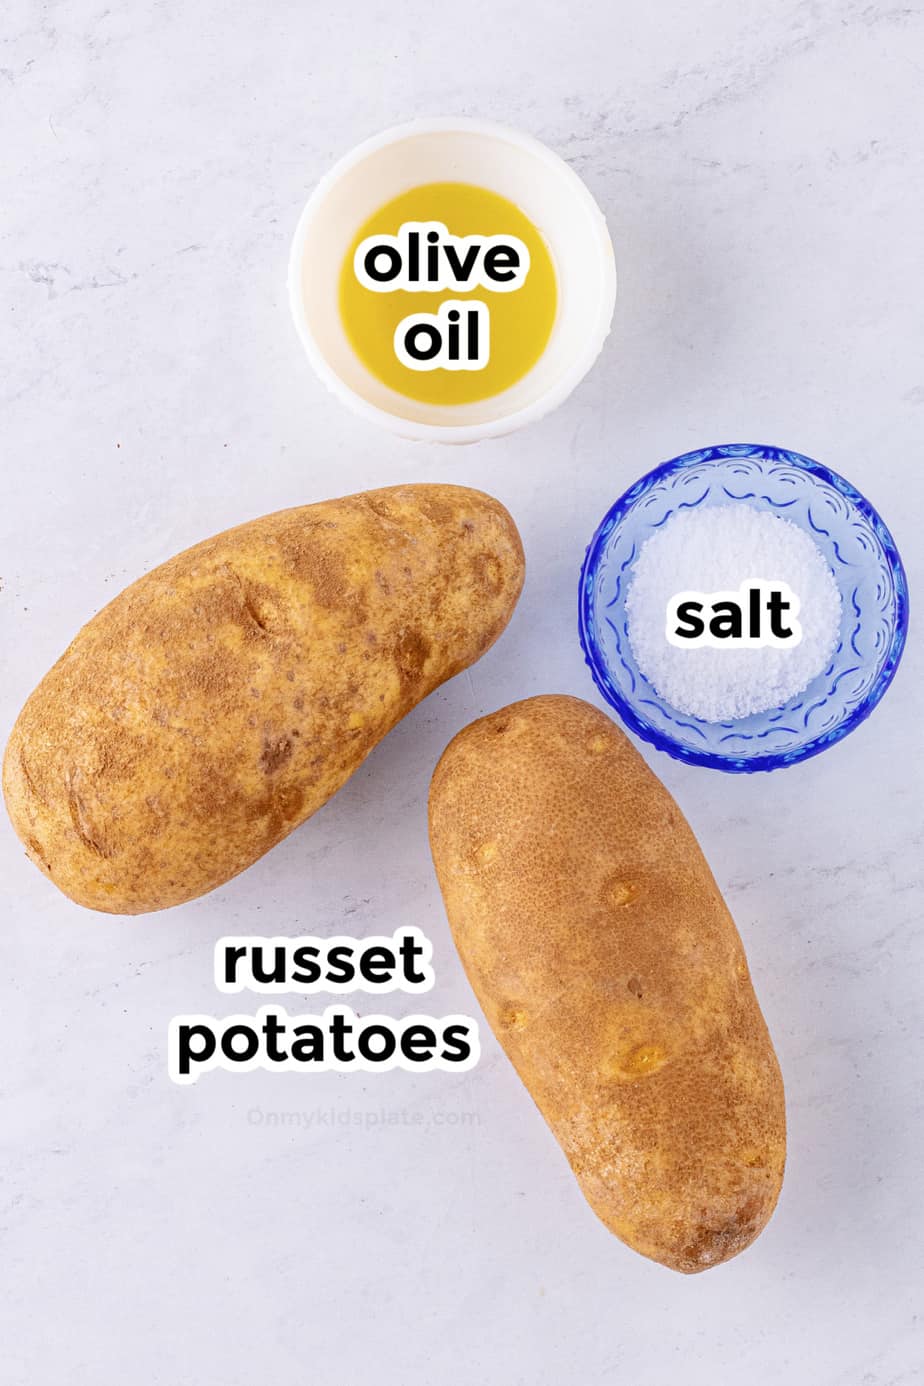 russet potatoes, olive oil and salt with labels